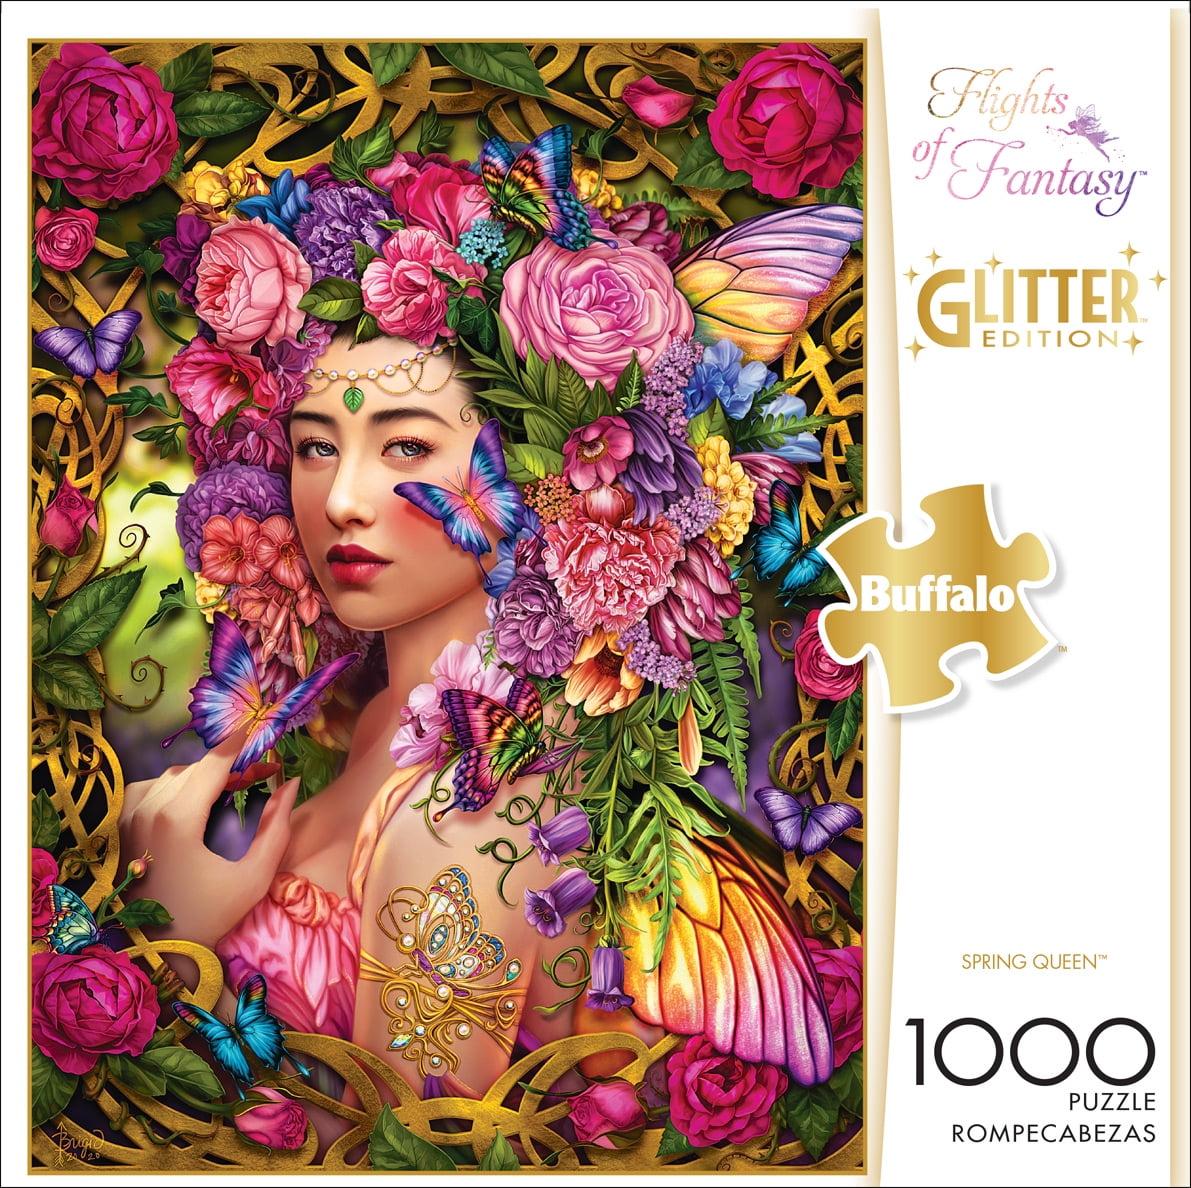 Flights of Fantasy Glitter 1000pc Buffalo Games Puzzle Twilight Marketplace for sale online 